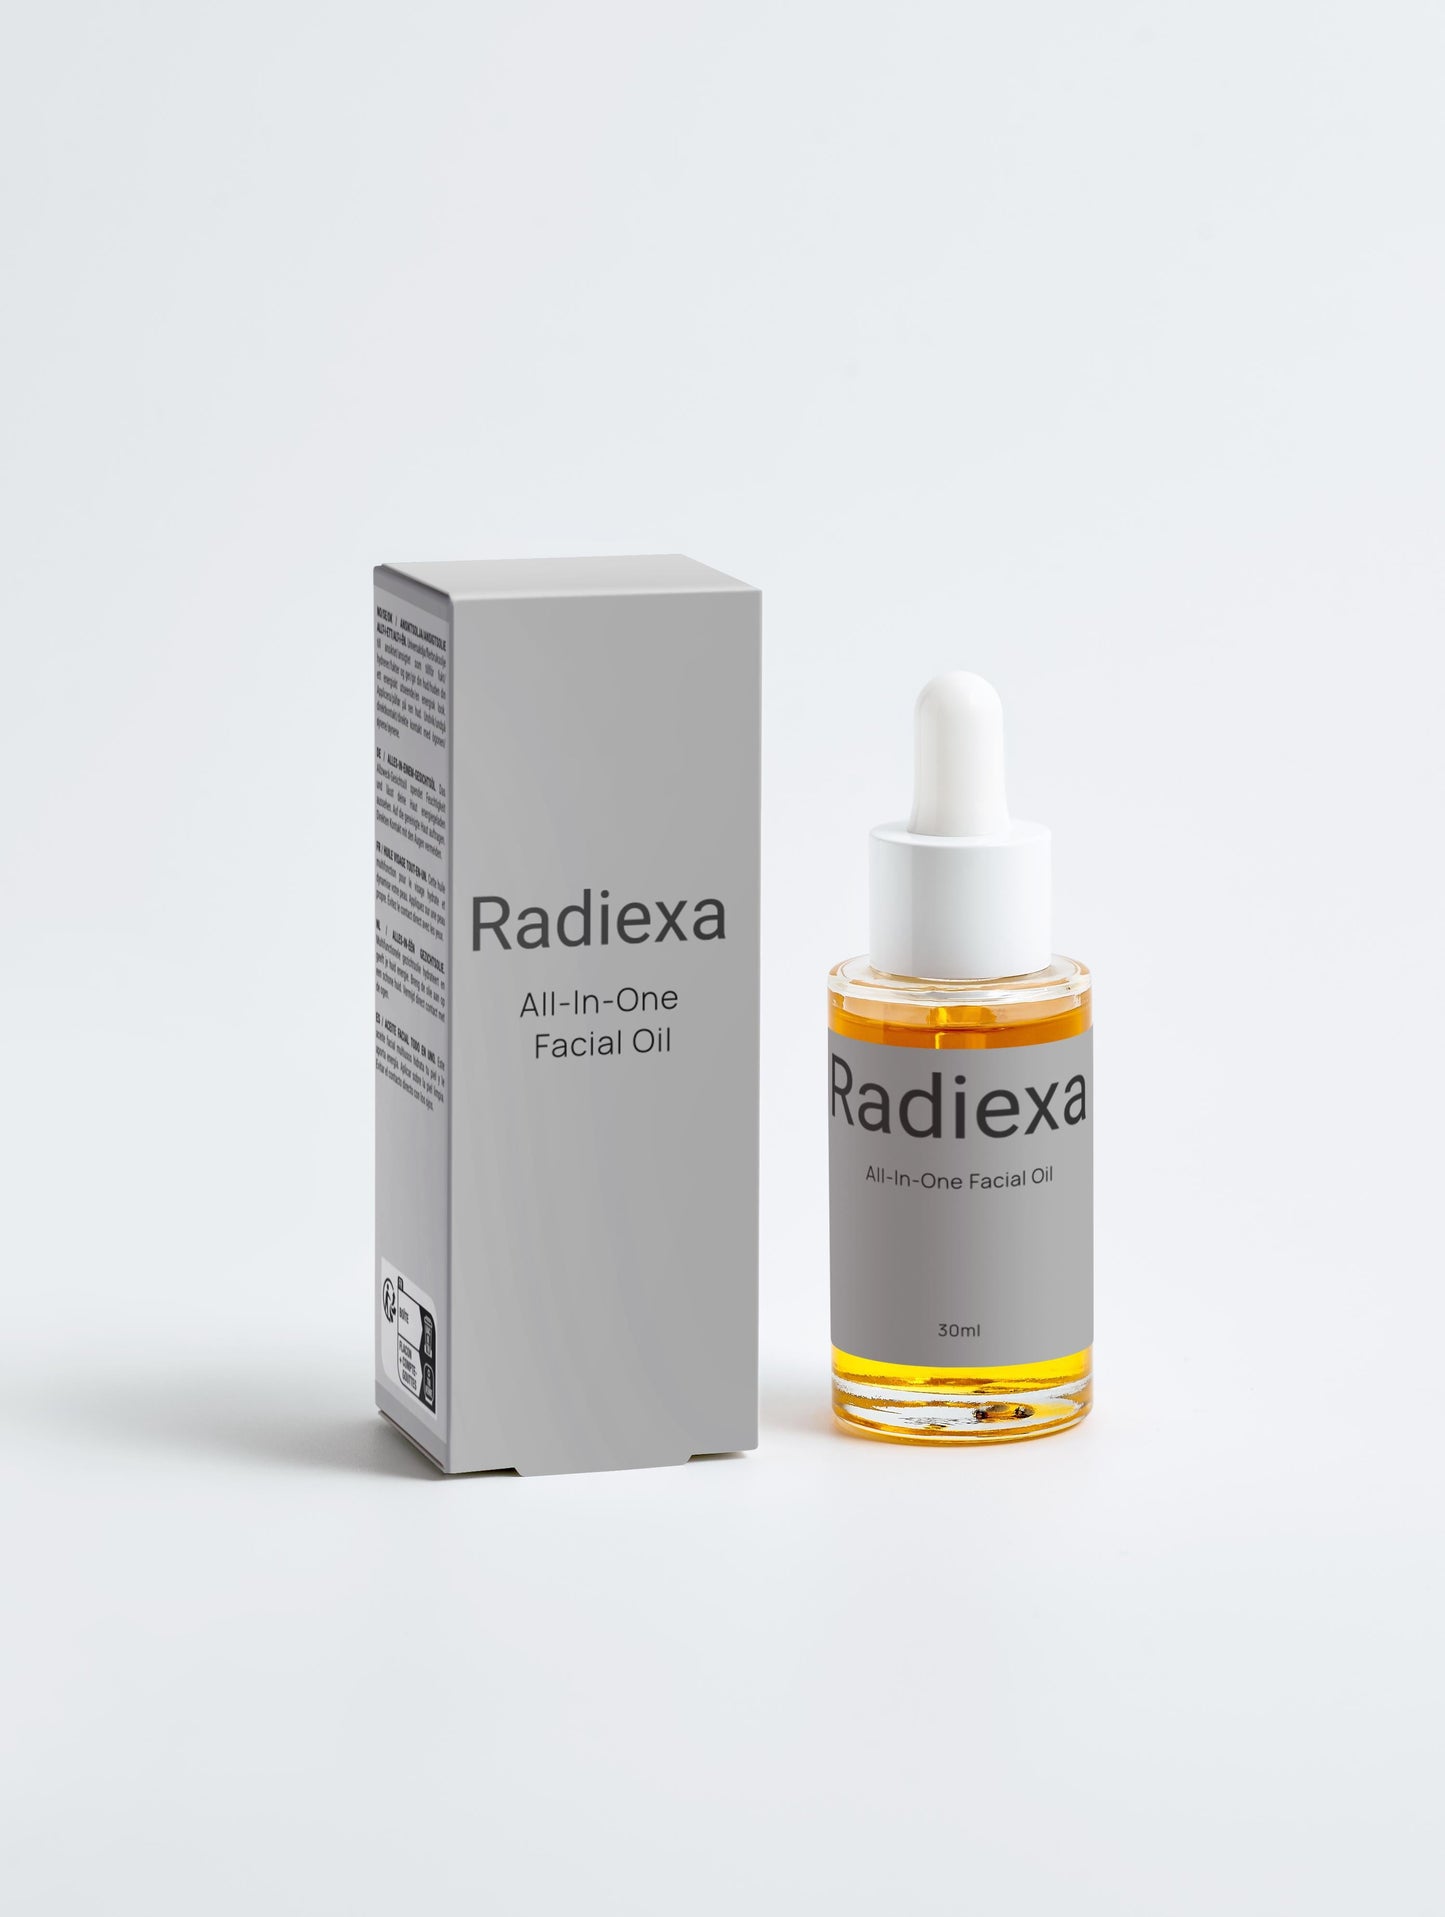 All-In-One Facial Oil - Radiexa5821